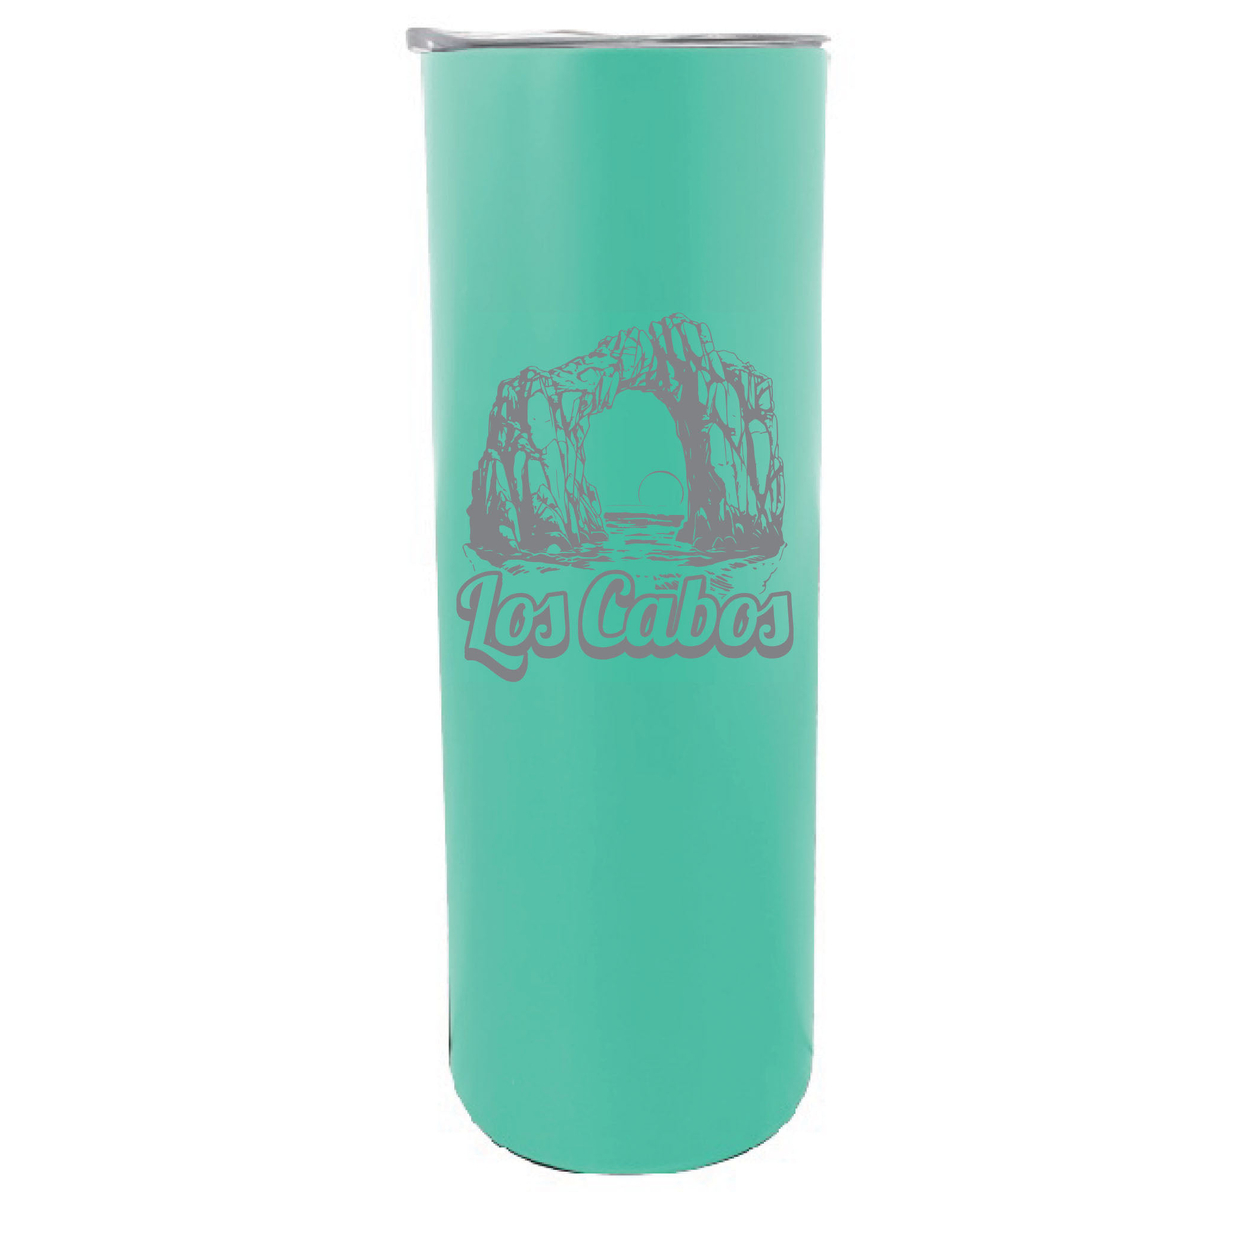 Los Cabos Mexico Souvenir 20 Oz Engraved Insulated Stainless Steel Skinny Tumbler - Black,,Single Unit